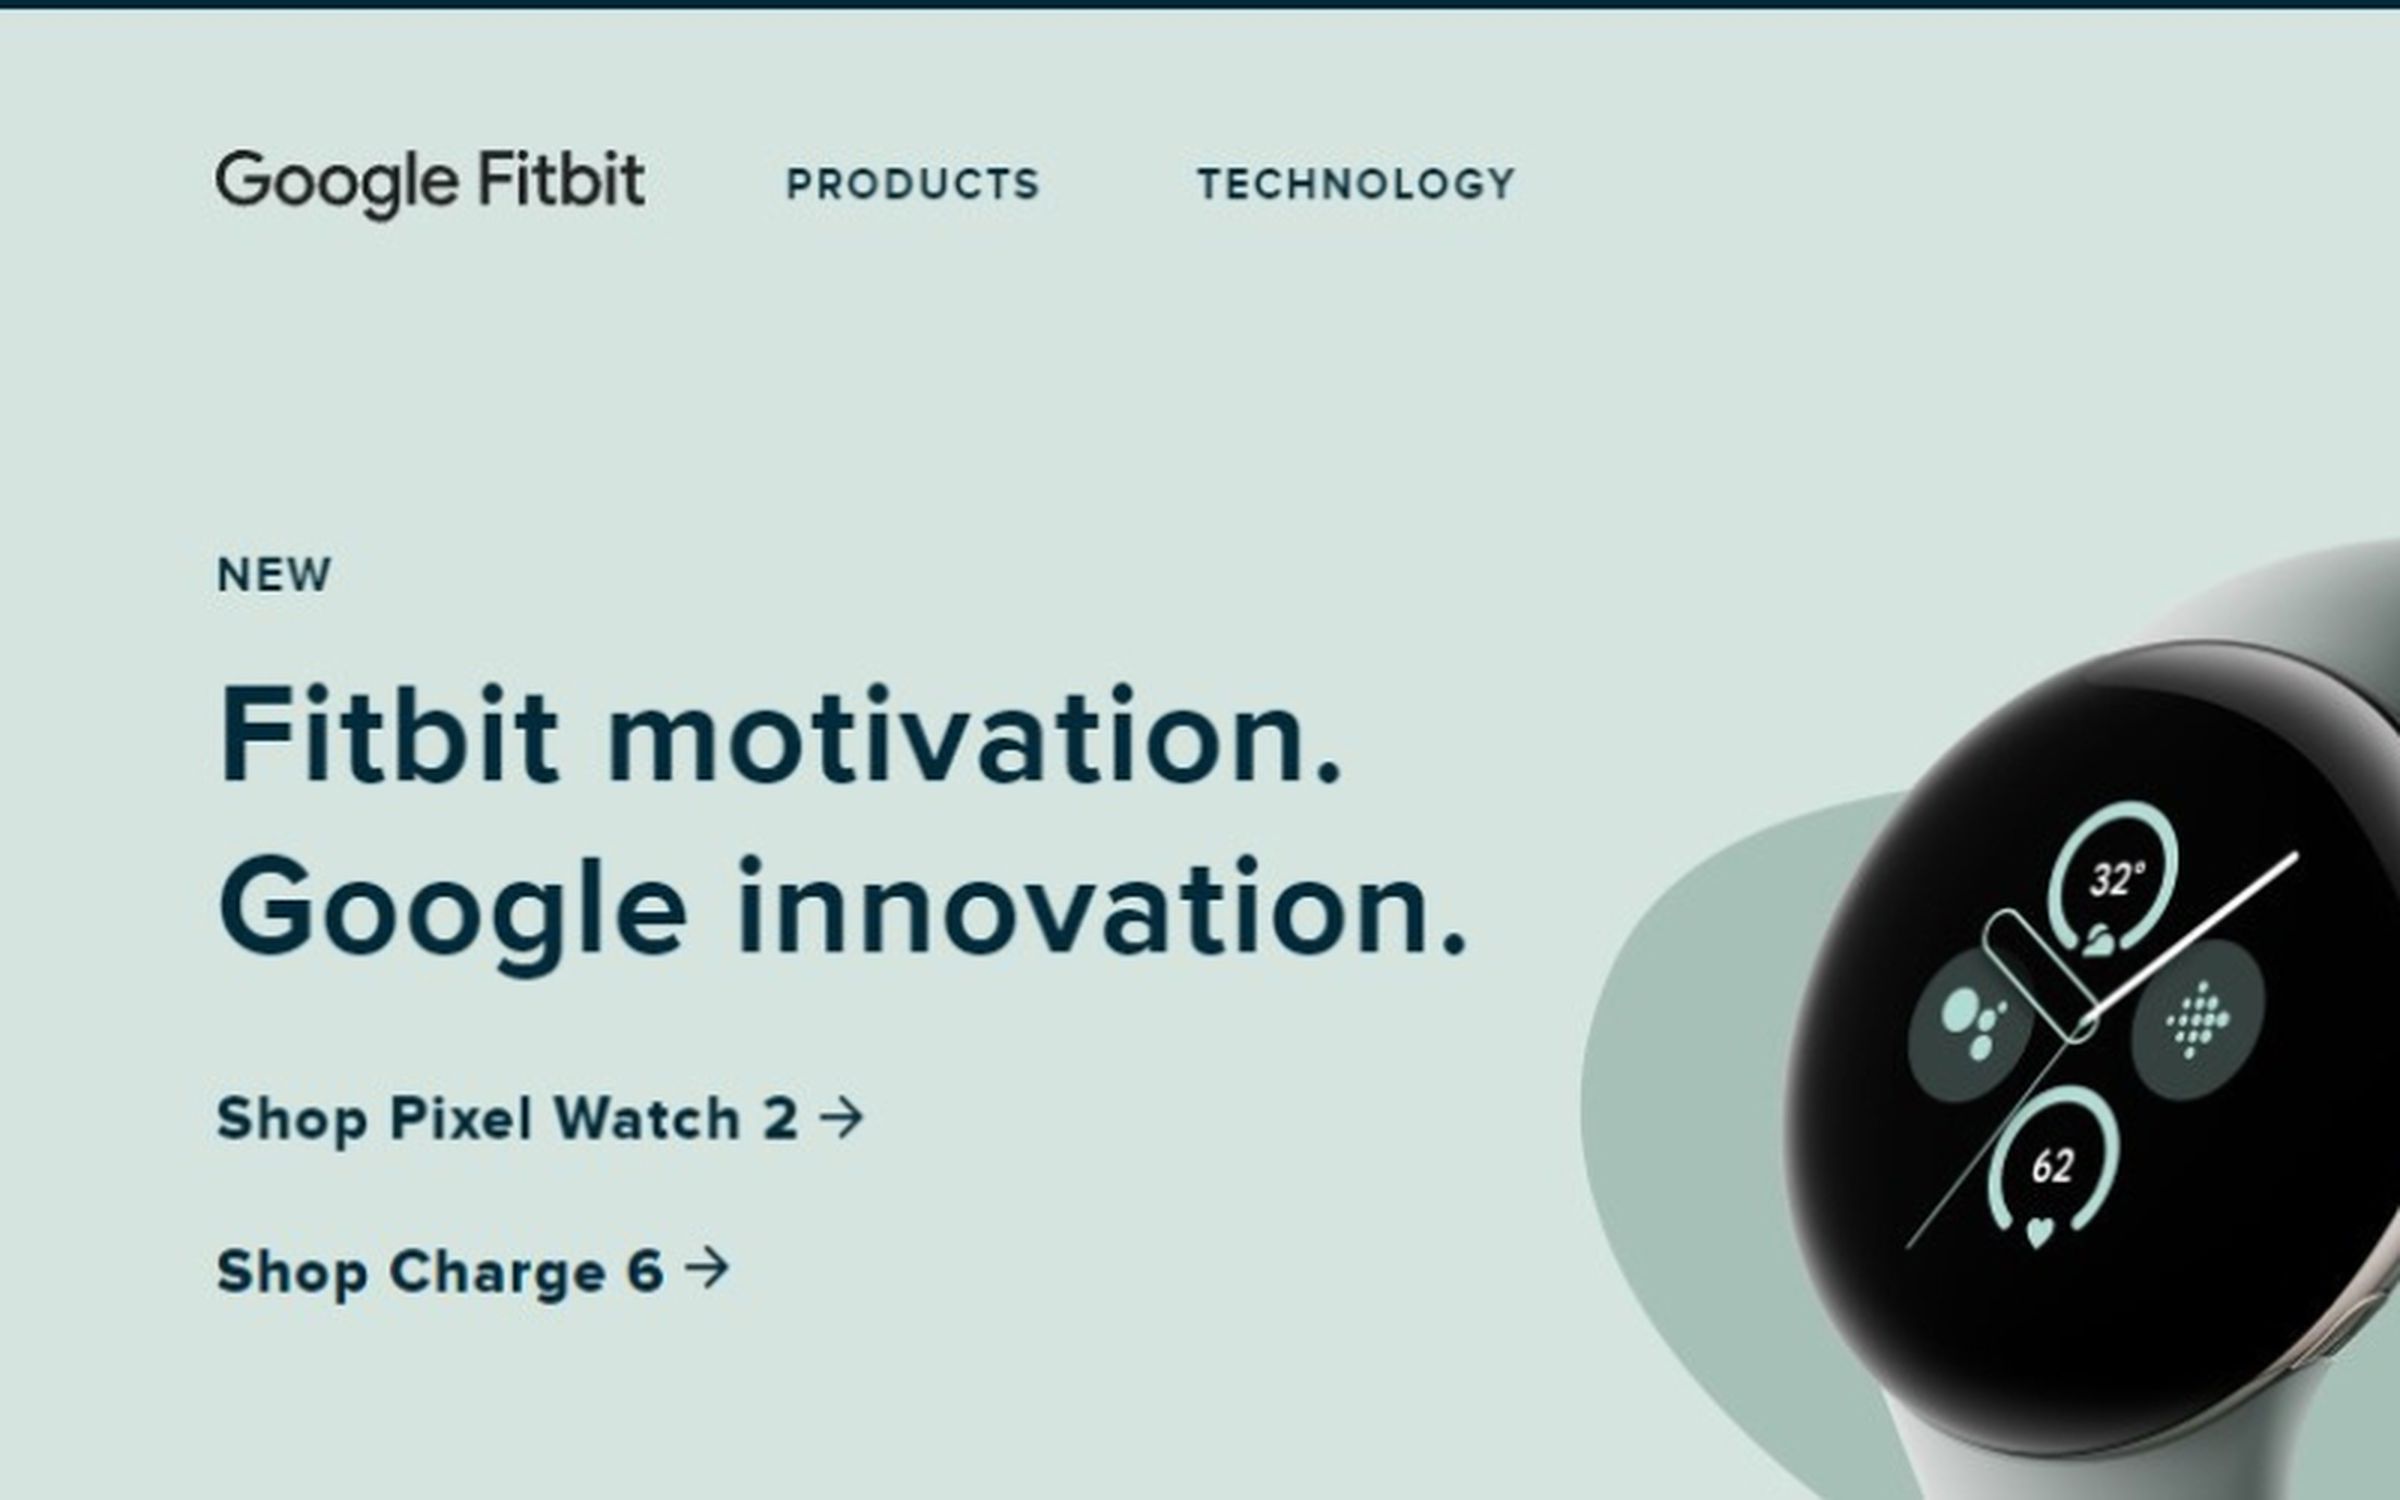 A screengrab of the Fitbit website showing updated Google branding.